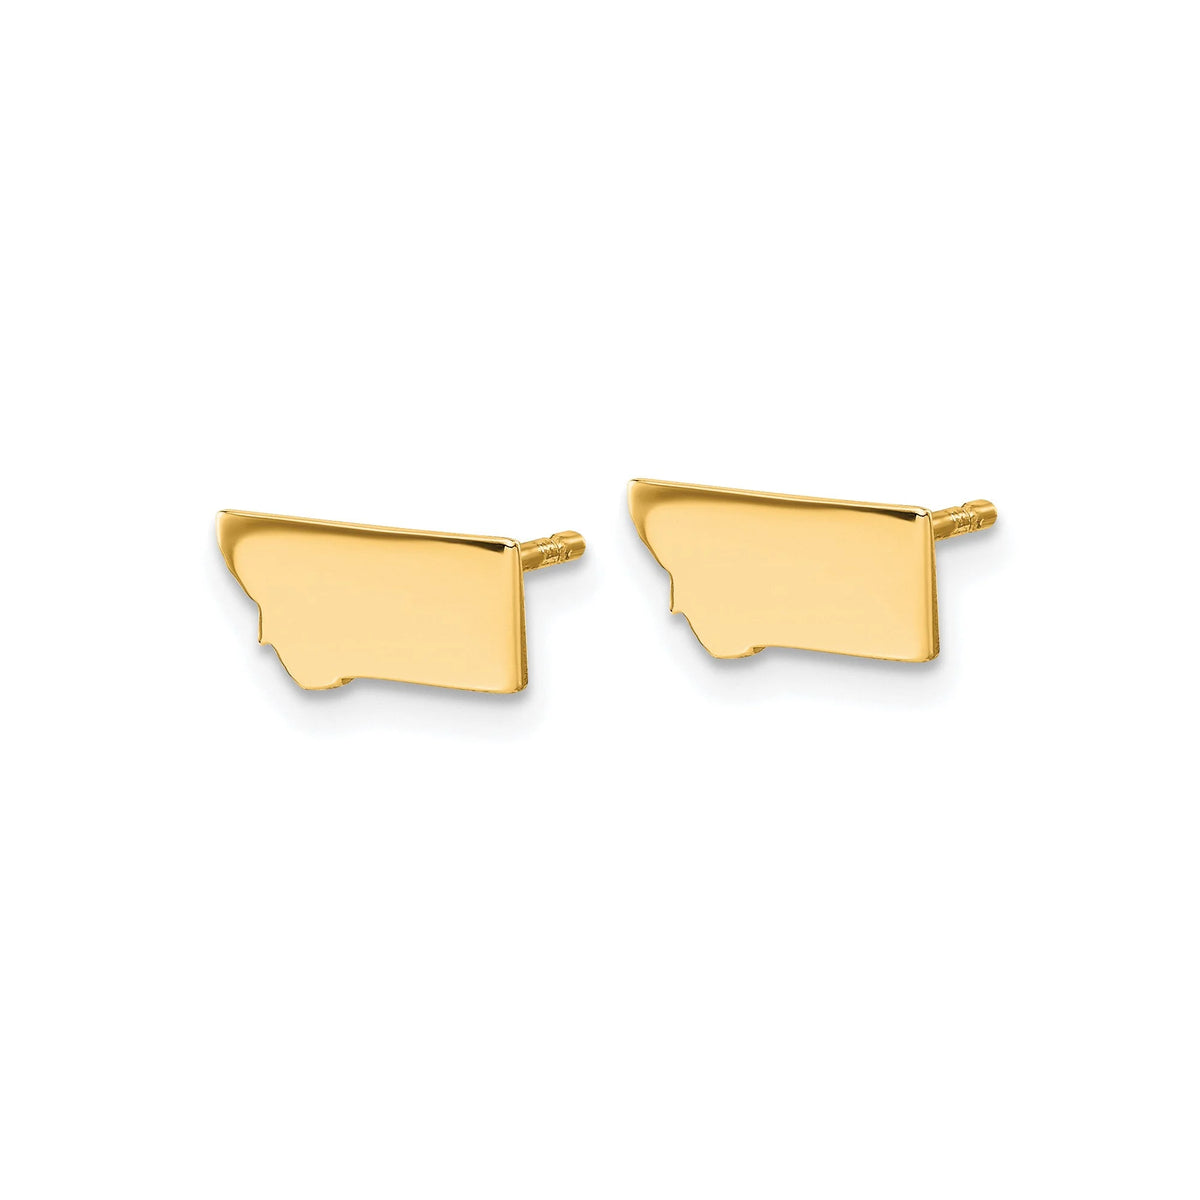 Montana Tiny State Stud Earrings - All States Available in Sterling Silver or 14k Yellow or White Gold - Tiny & Beautiful Montana Studs